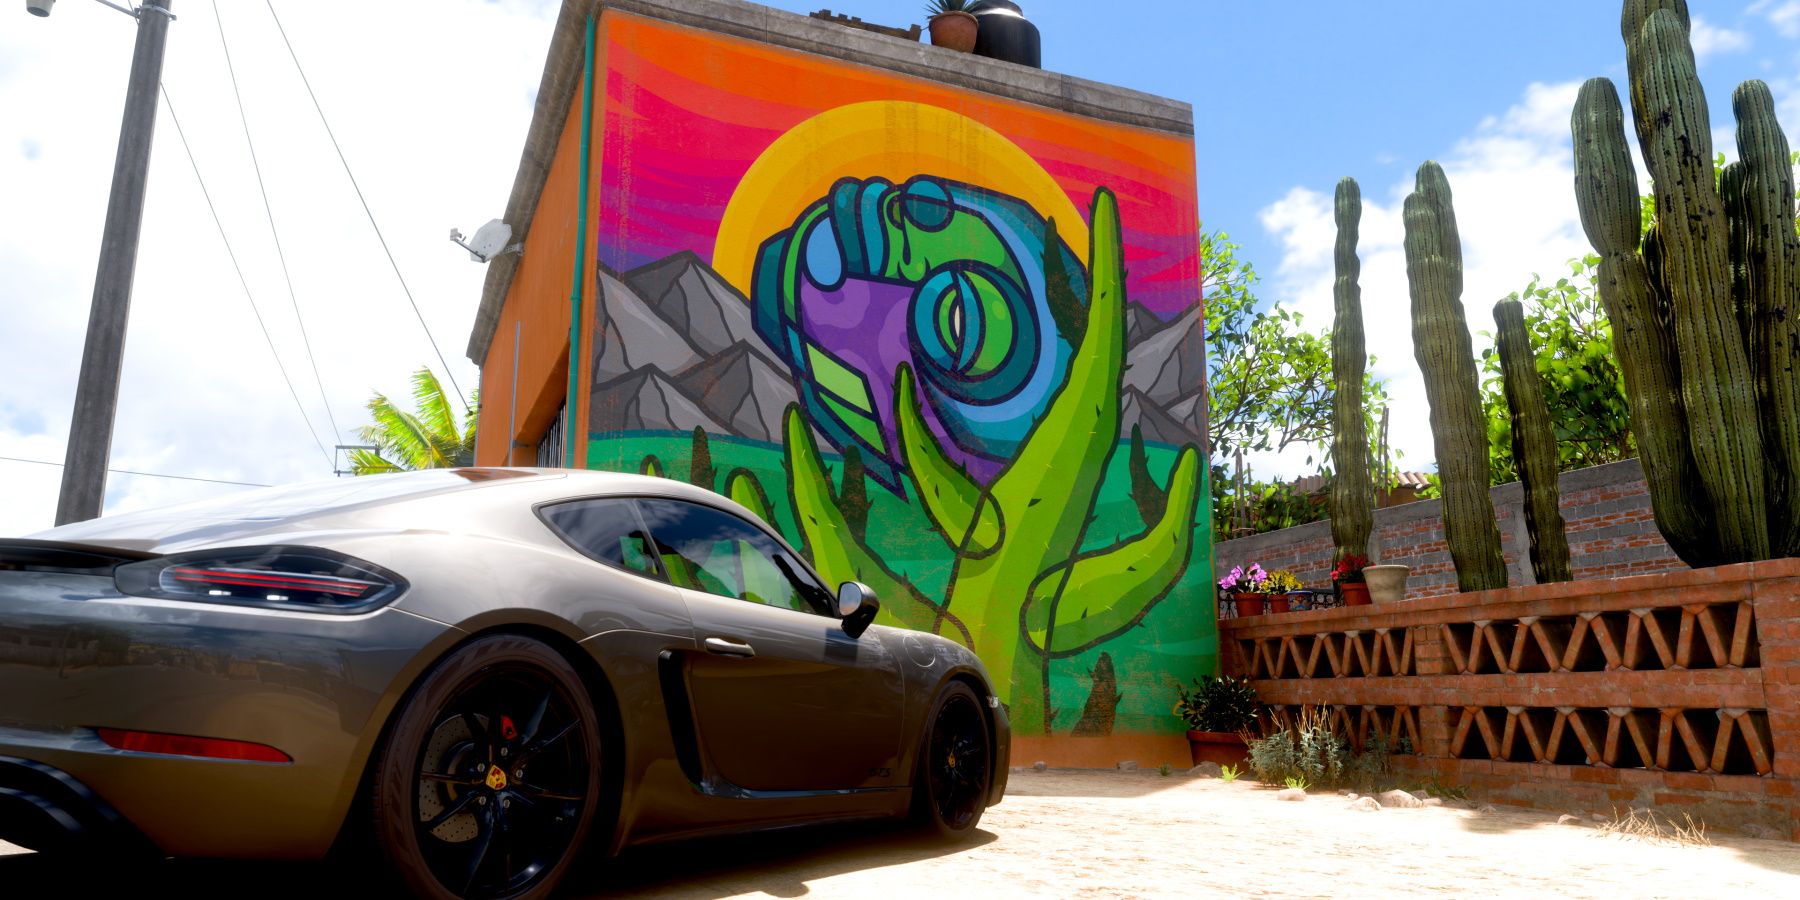 Forza Horizon 5 modern sports car un front of mural for challenge